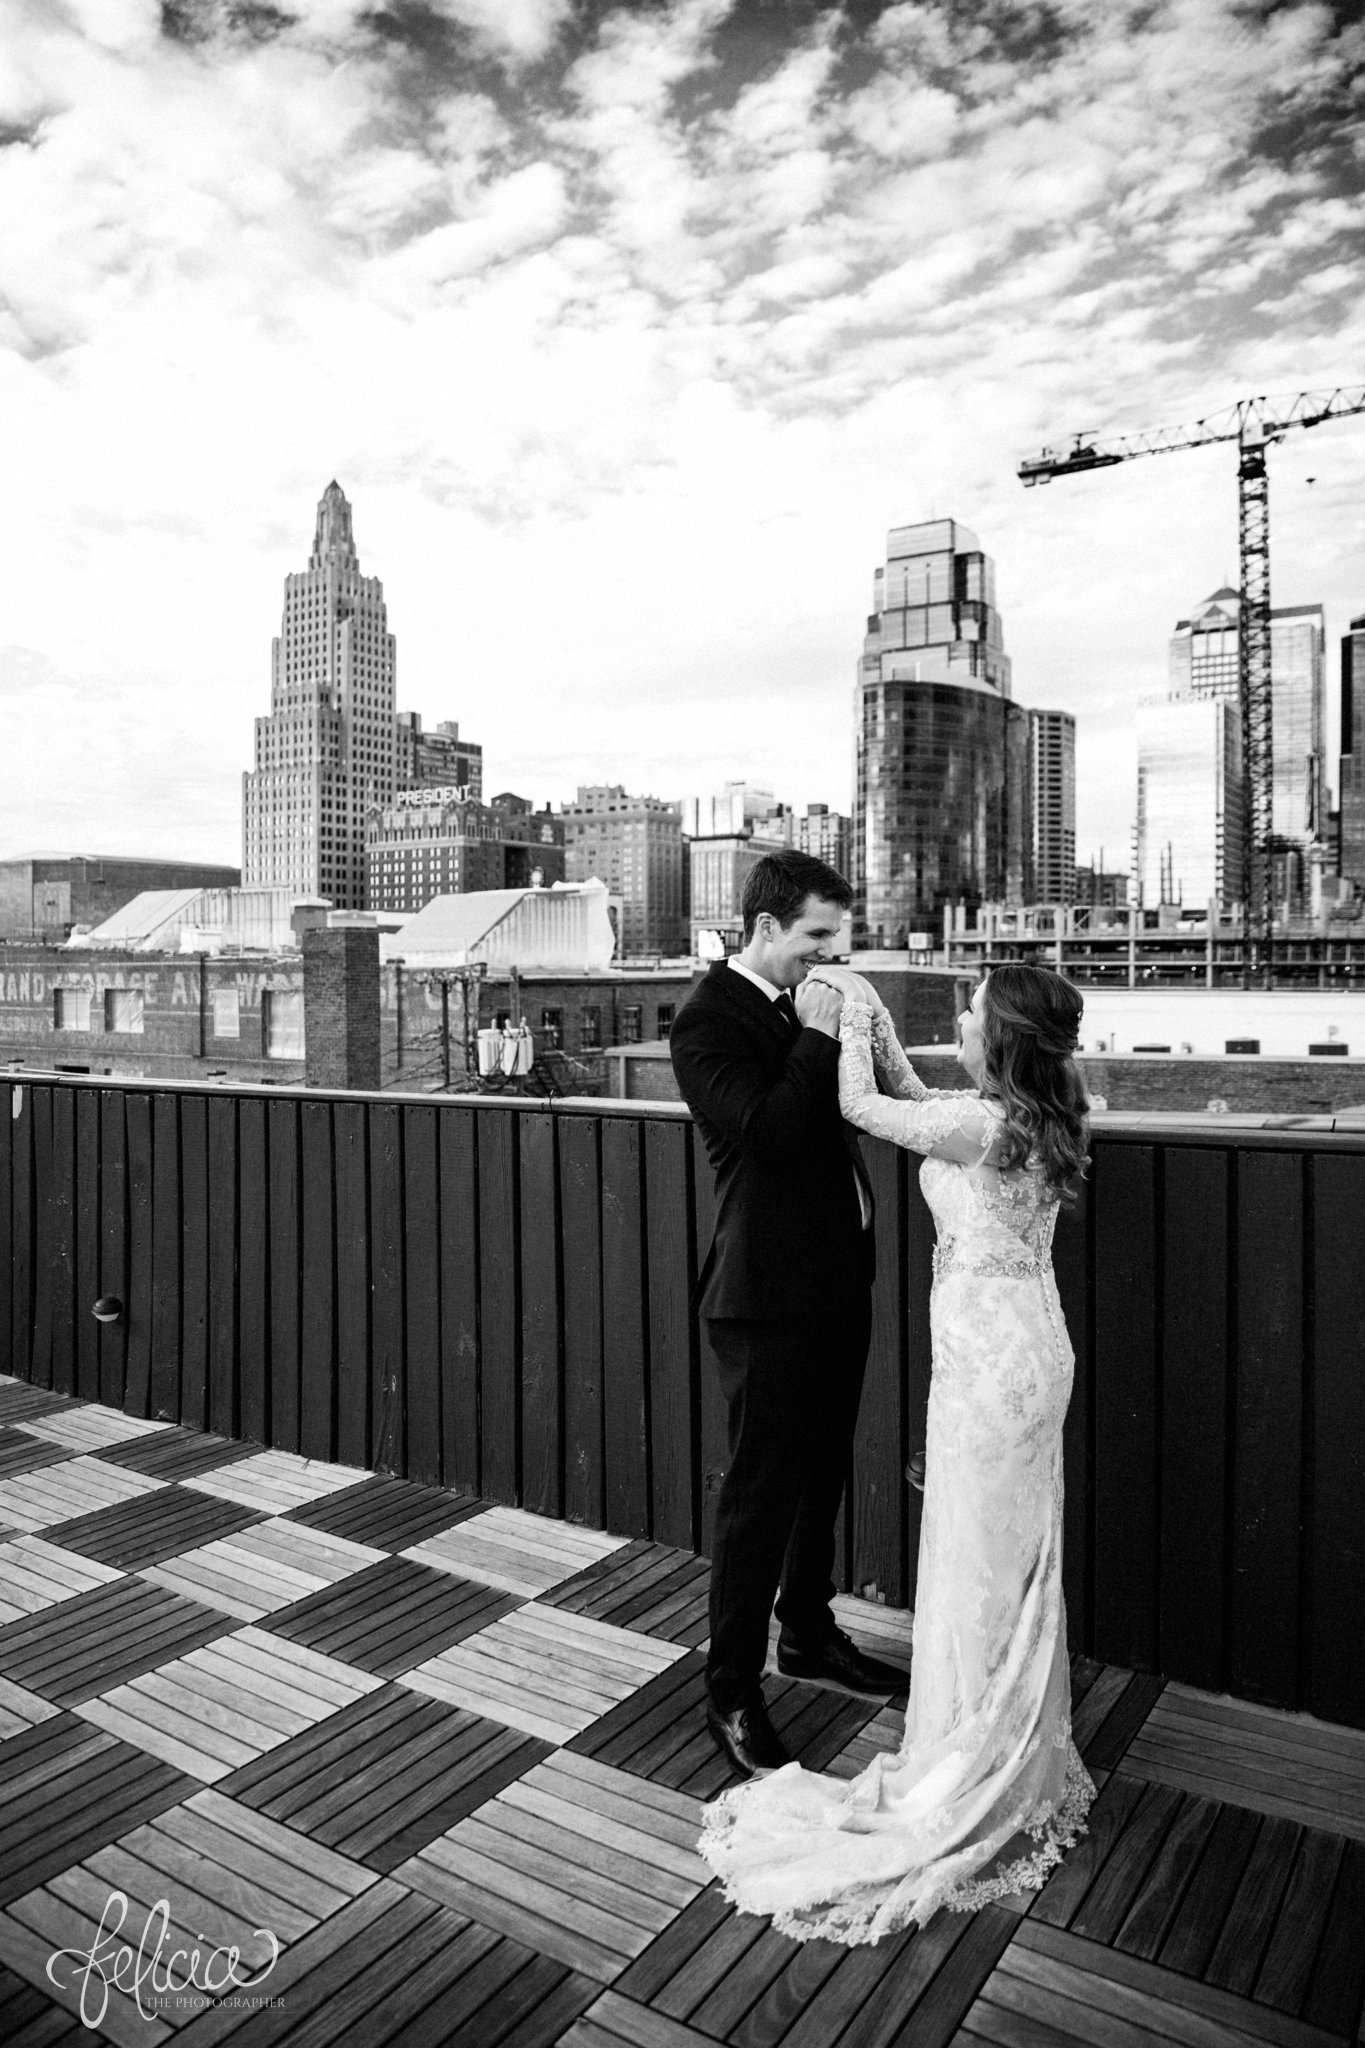 black and white | weddings | wedding photos | wedding photography | images by feliciathephotographer.com | St. Therese Catholic Church | Kansas City | downtown | The Terrace on Grand | bridal party portraits | urban jungle | Kansas City skyline | bride and groom portrait | rooftop photo | hand kiss 